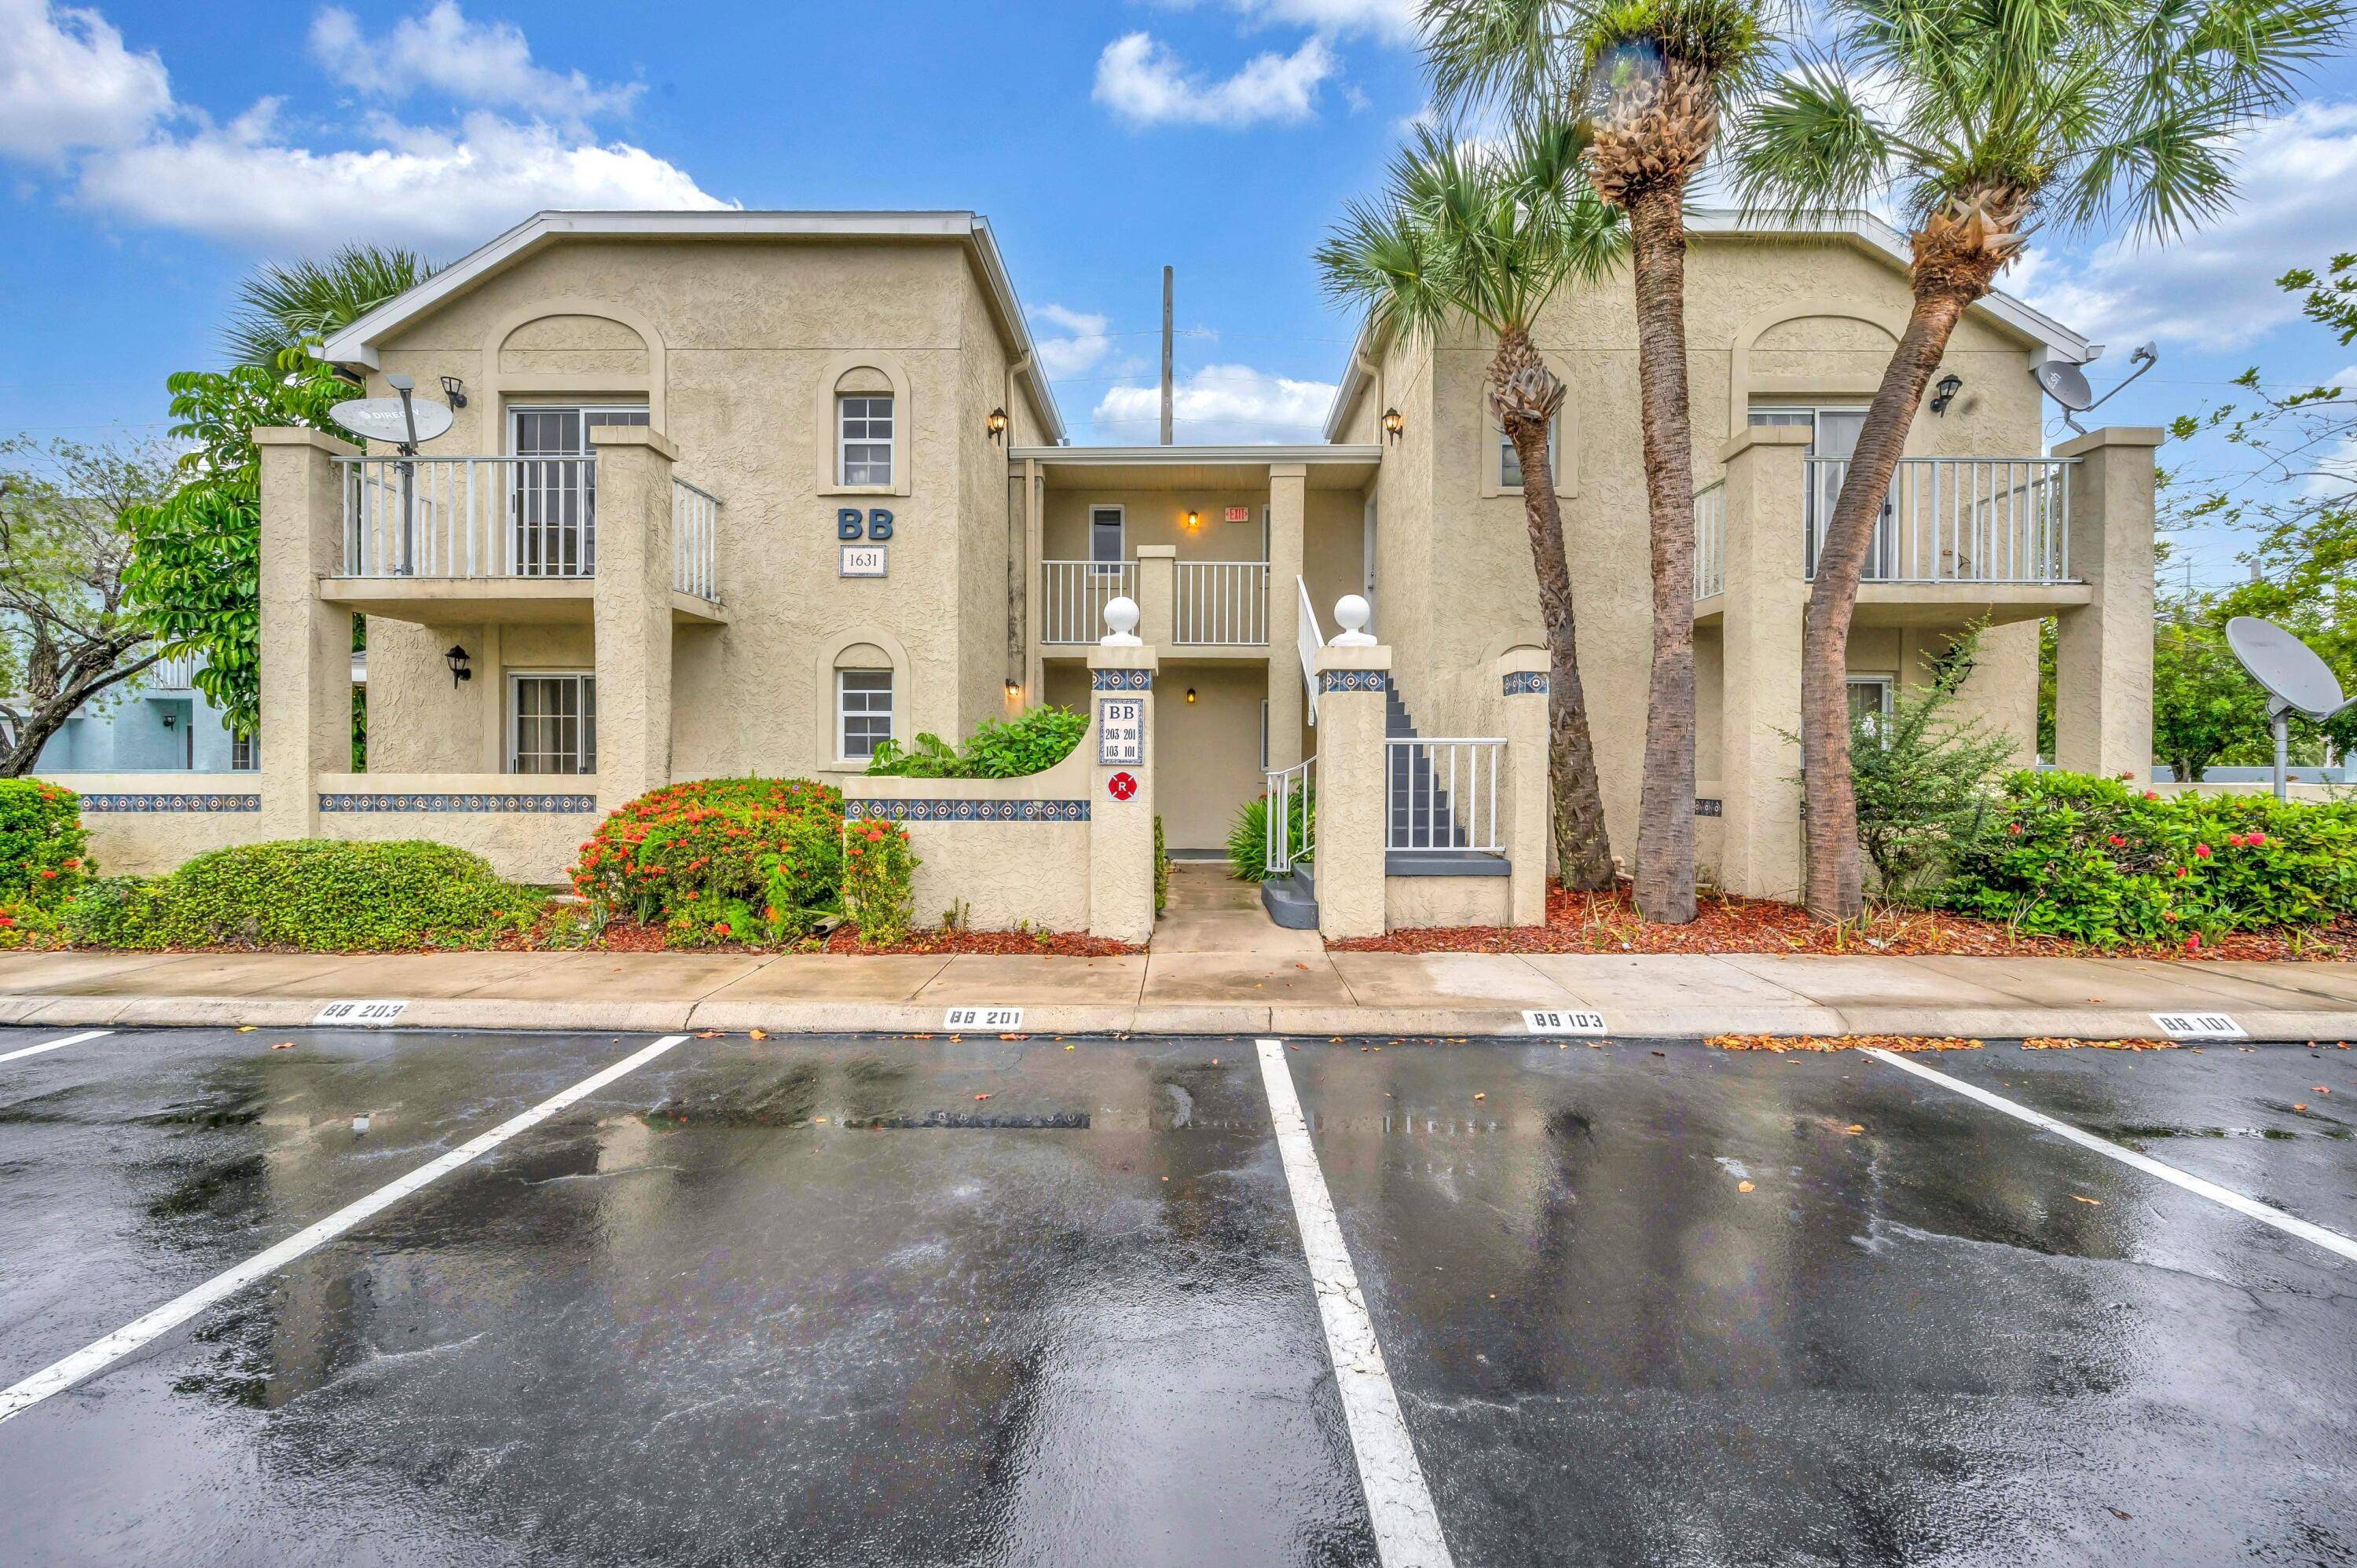 Check out this charming first floor 2 2 condo with low HOA fees !